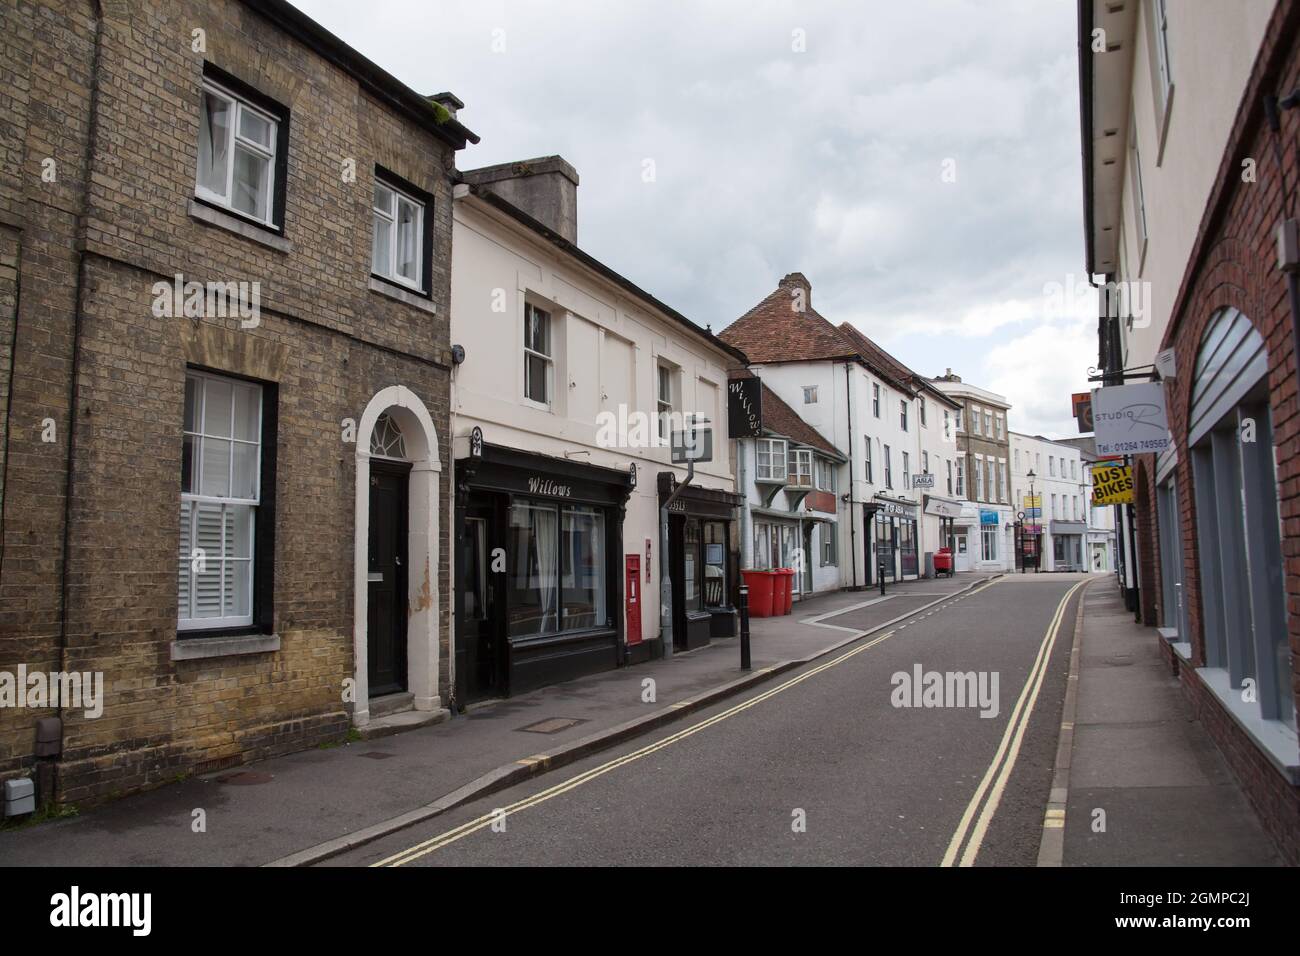 Views of The High Street in Andover, Hampshire in the UK Stock Photo